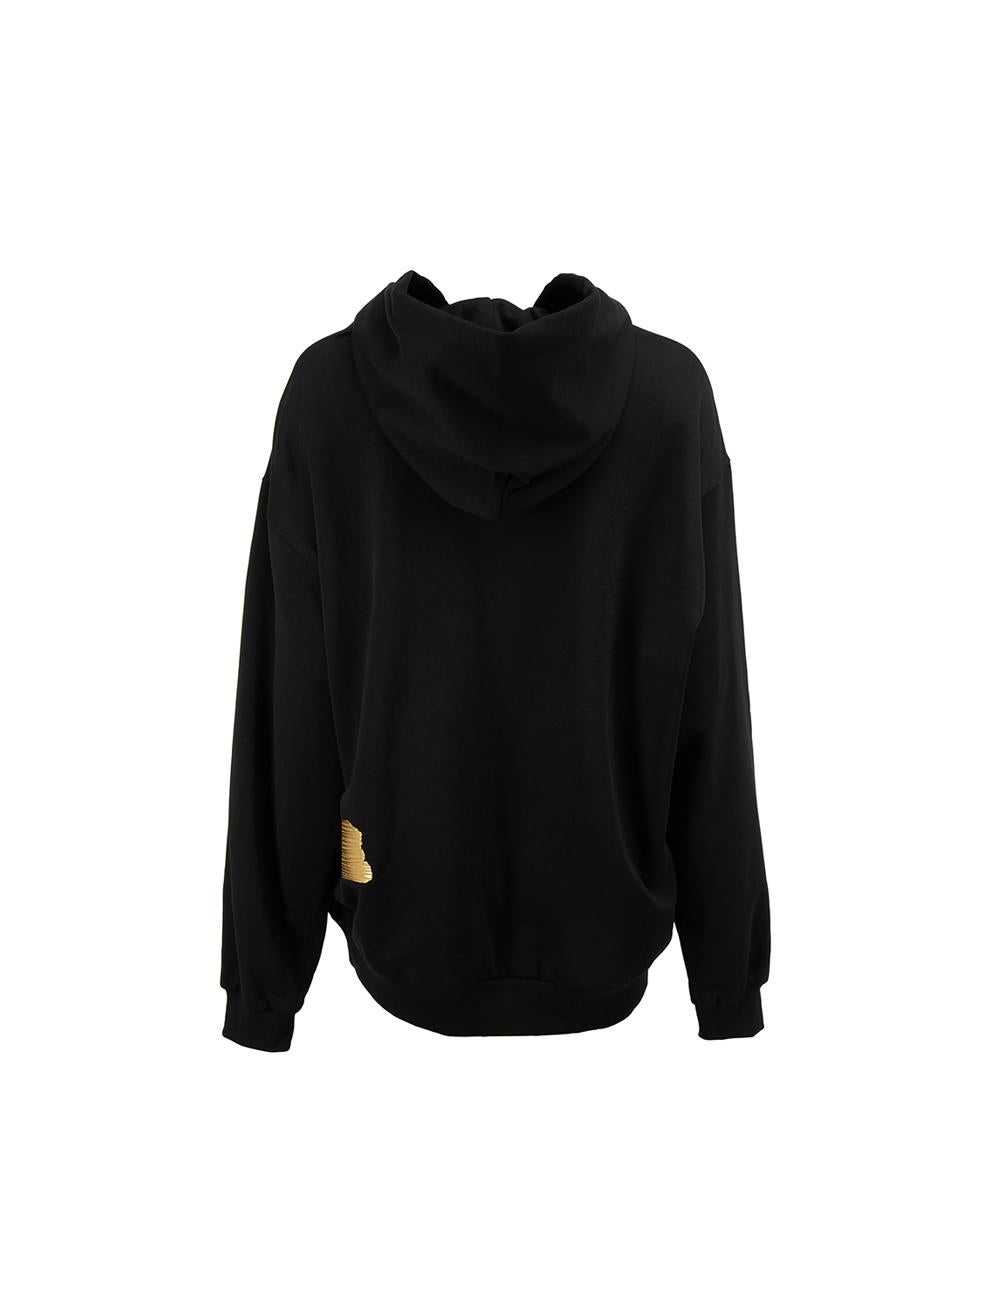 Black Cotton Gold Realtà Parallela Print Hoodie Size XS In New Condition For Sale In London, GB